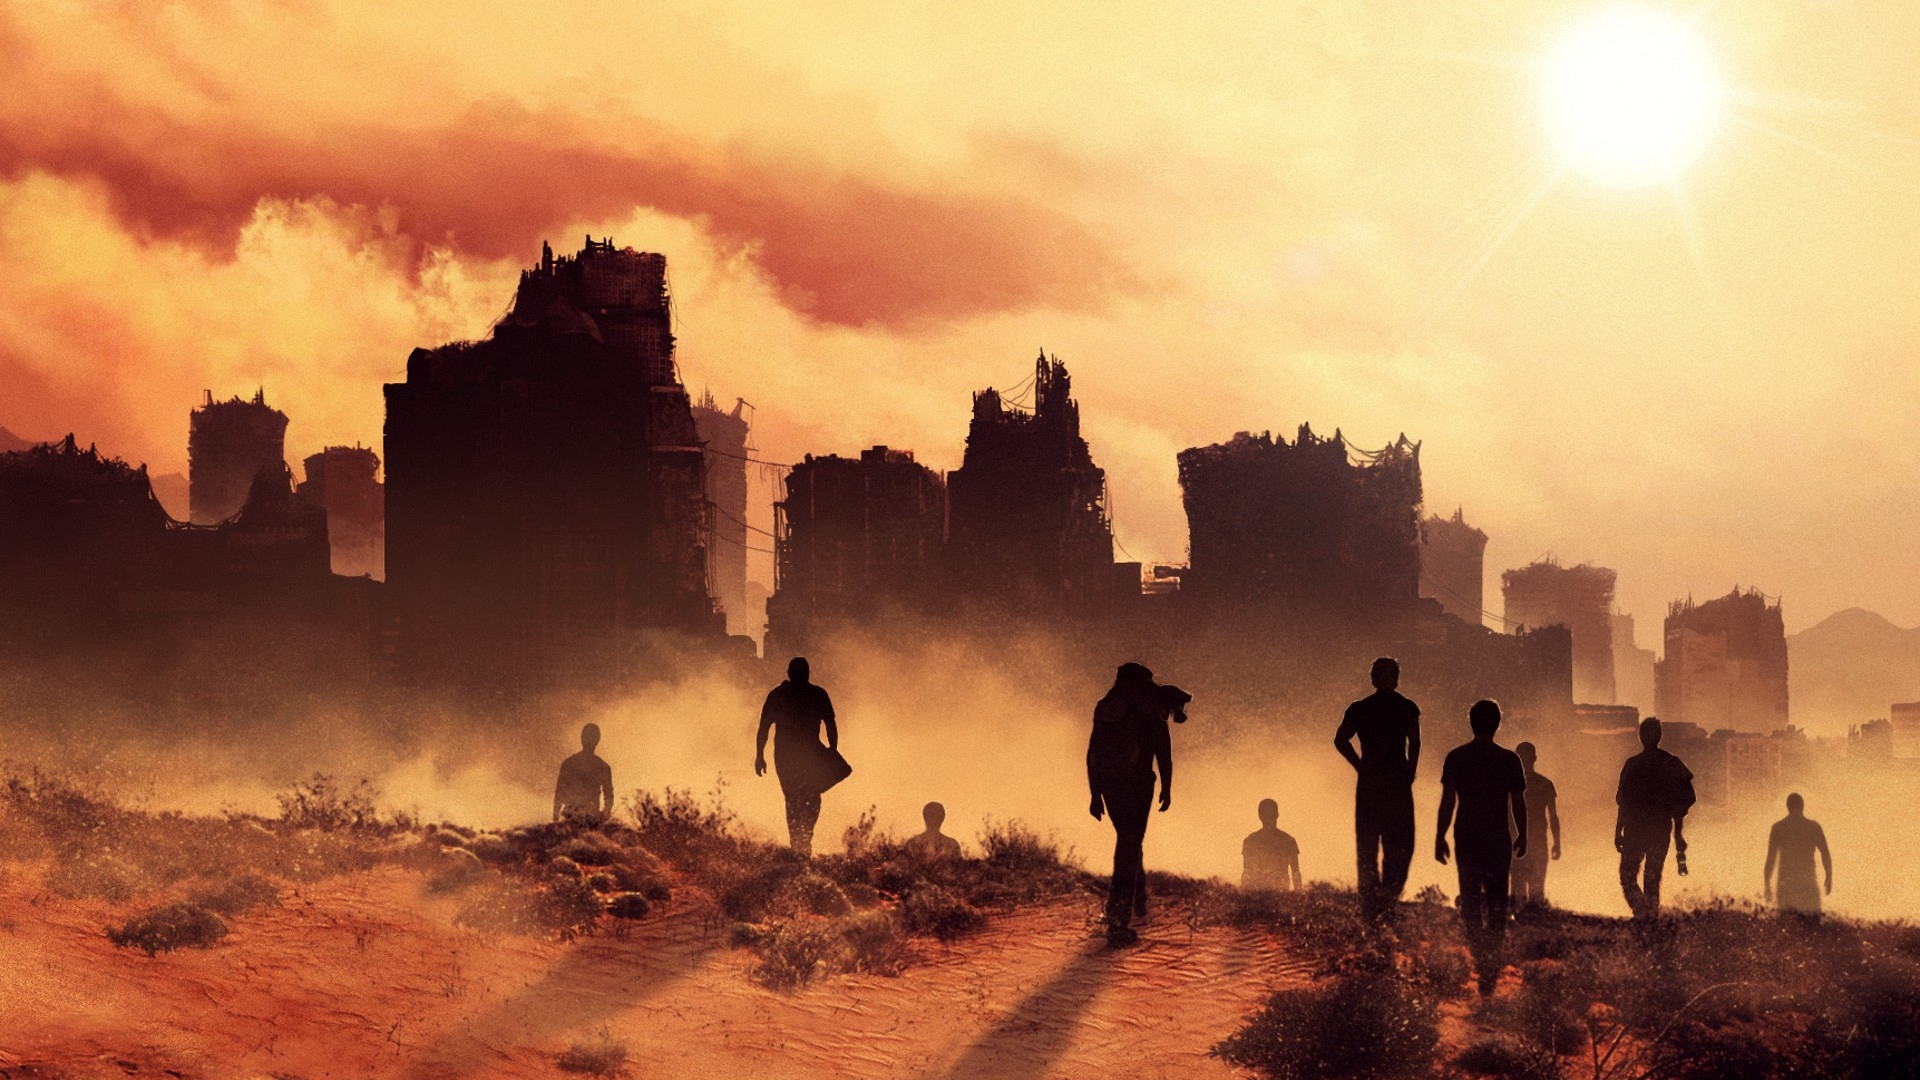 Maze Runner The Scorch Trials Silhouettes for 1920 x 1080 HDTV 1080p resolution